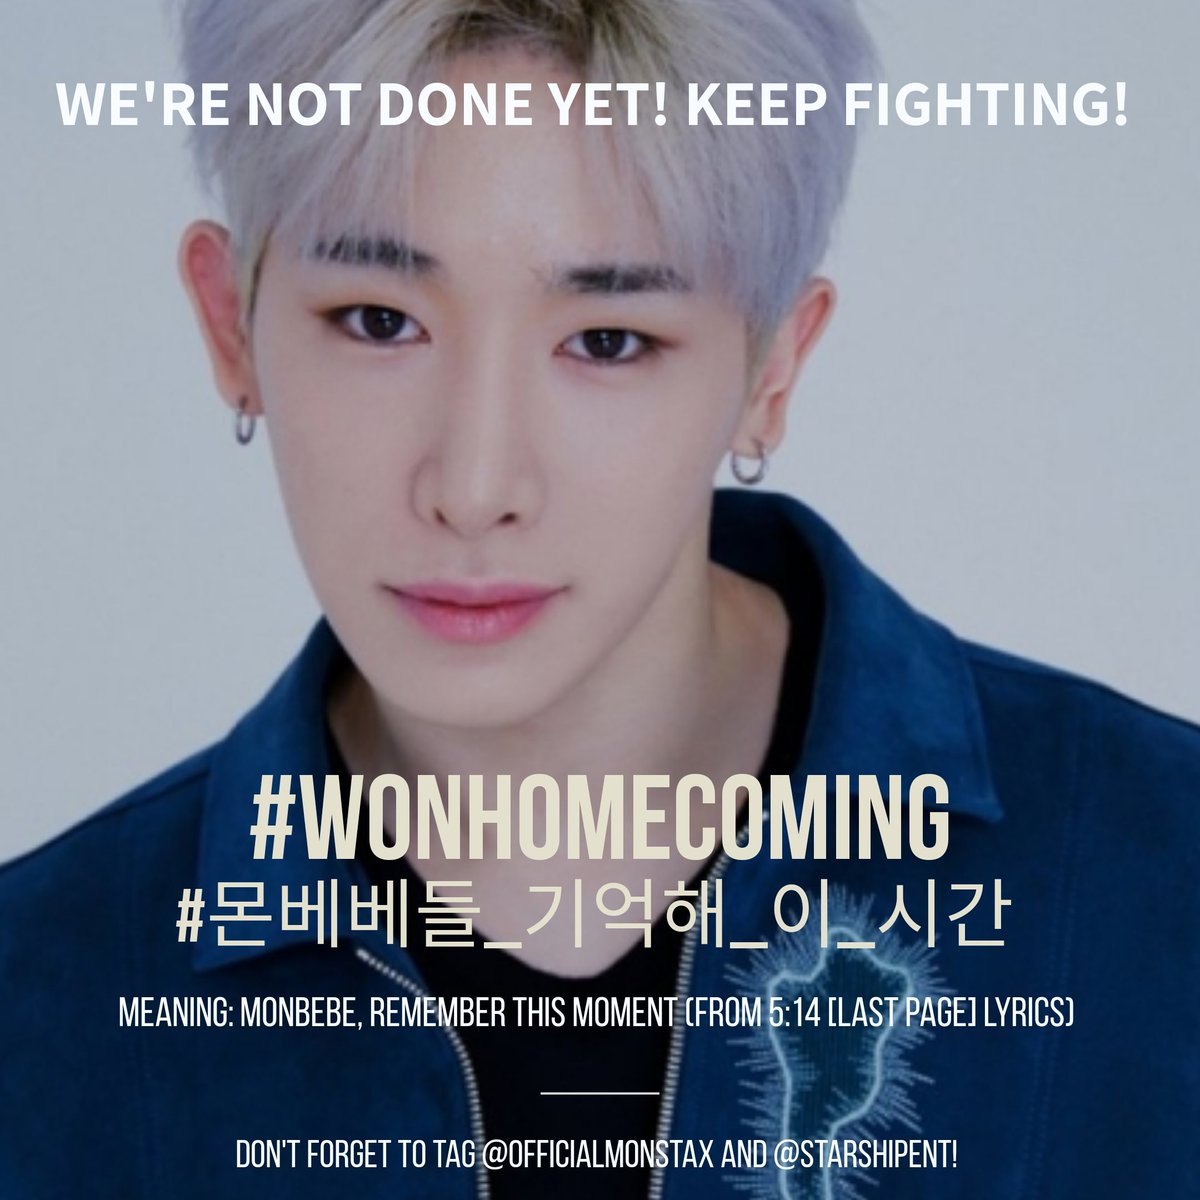 2020031612am KST onwards254th Hashtags @OfficialMonstaX  @STARSHIPent  #WONHOMECOMING  #몬베베들_기억해_이_시간502 official protest Hashtags https://twitter.com/bebewonhos/status/1238653032256192513?s=19